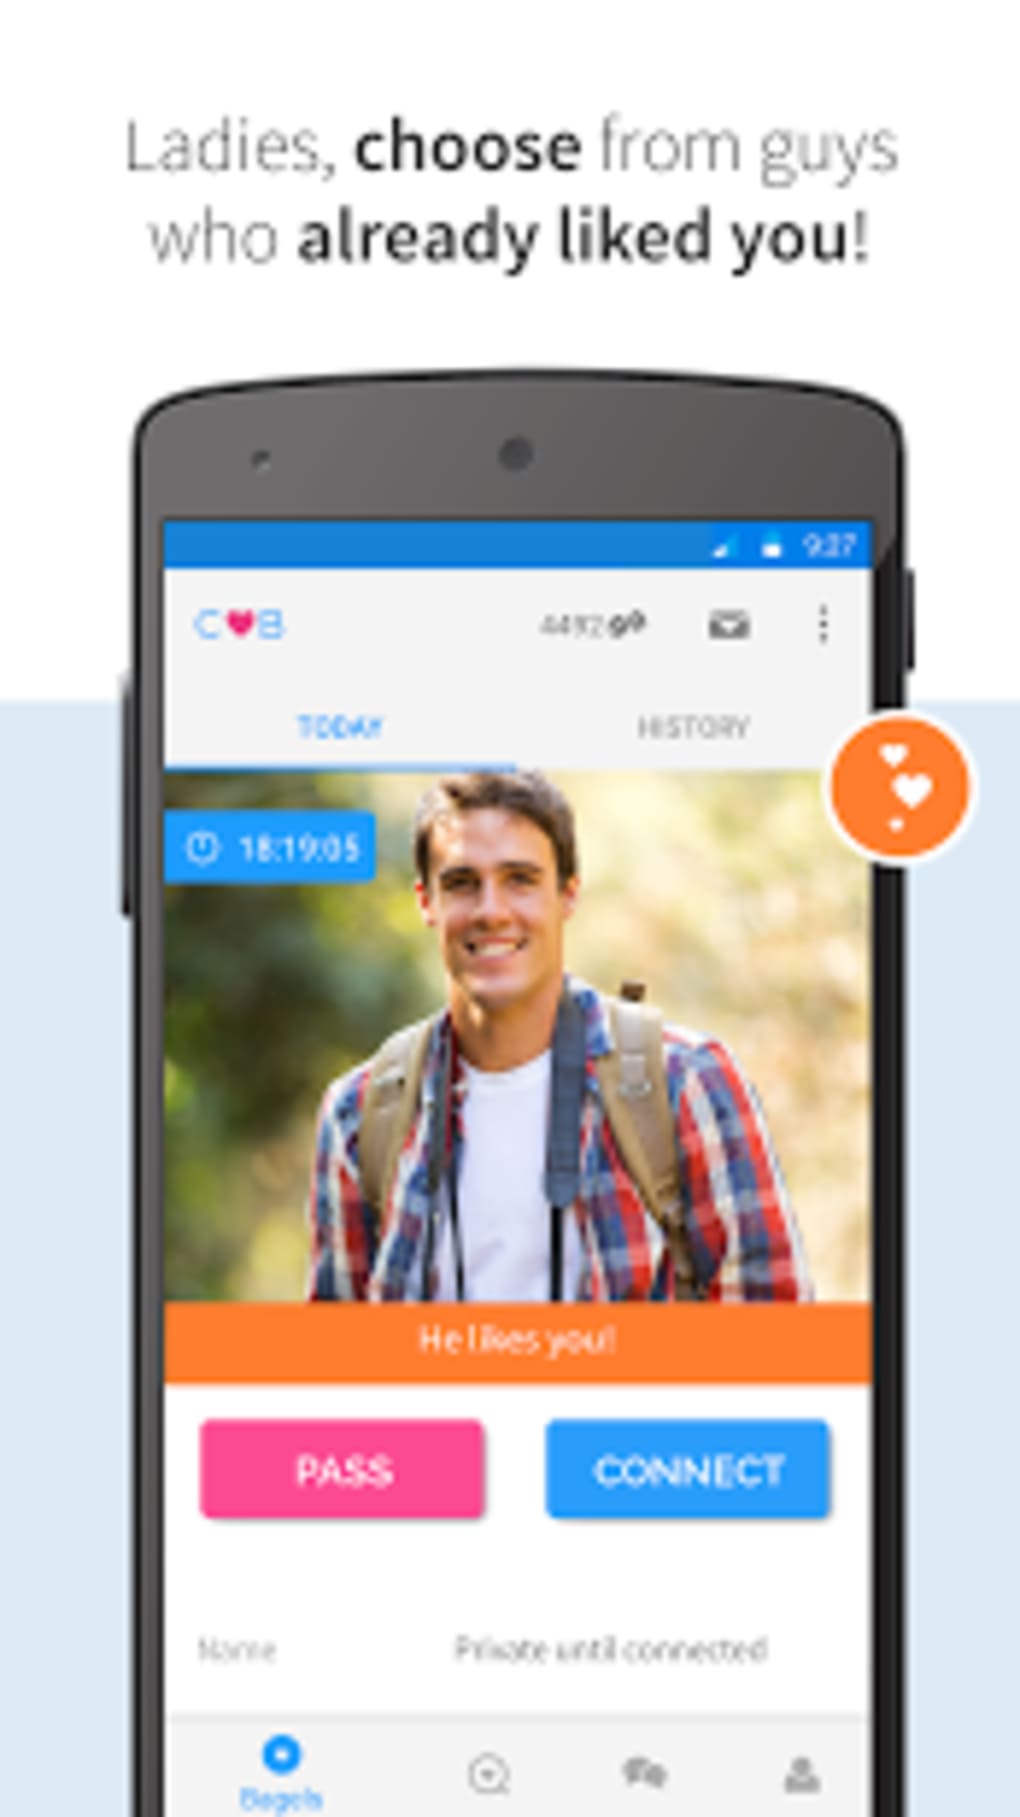 Free dating apps for android